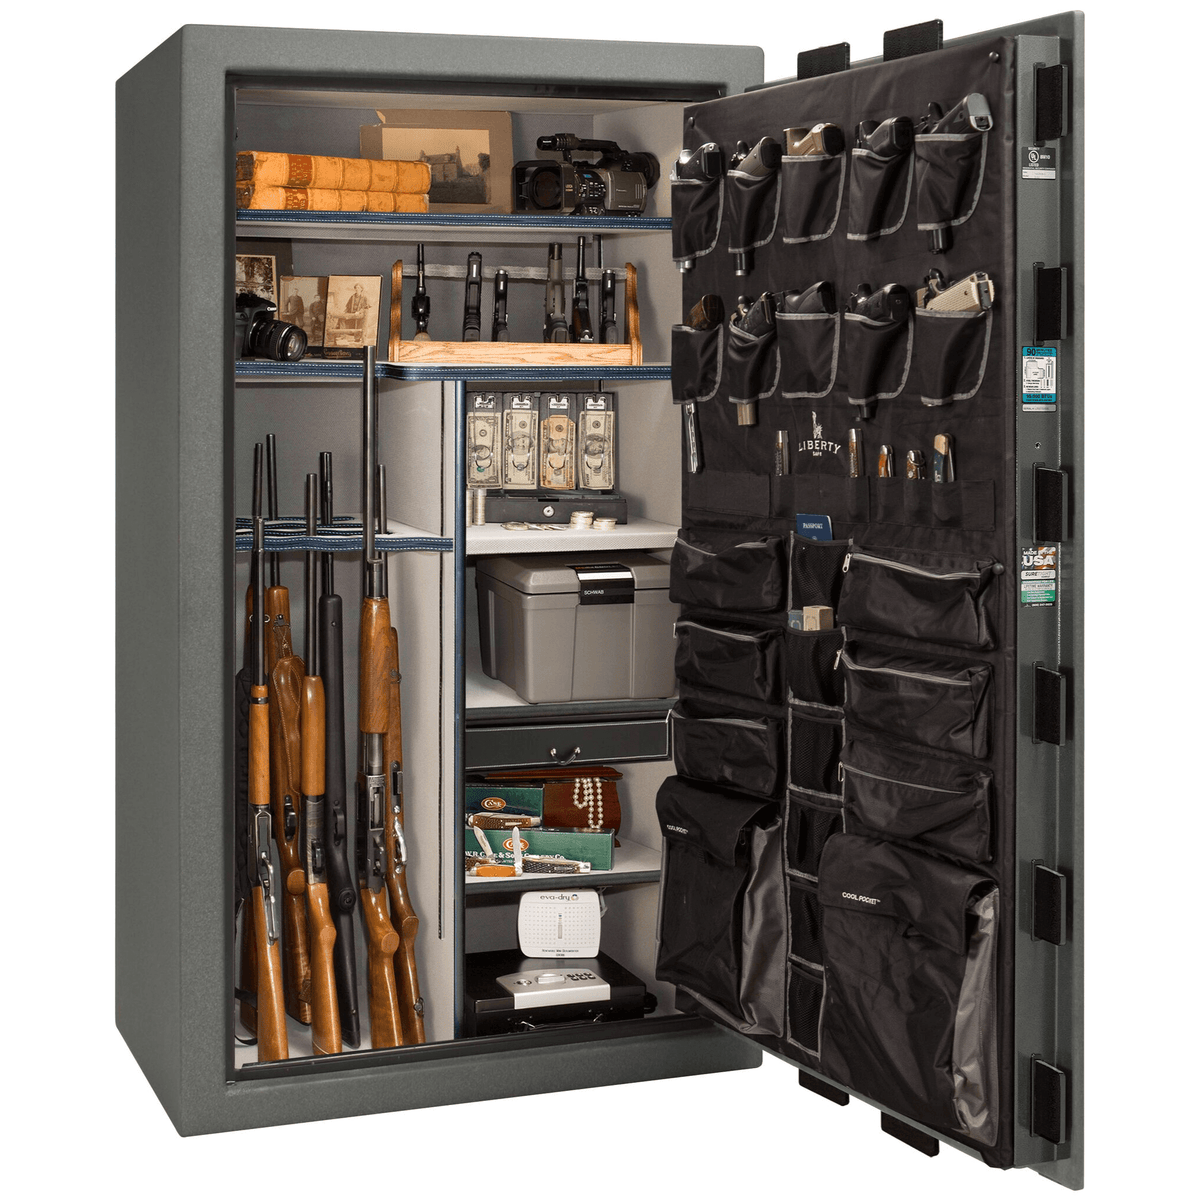 Lincoln Series | Level 7 Security | 110 Minute Fire Protection | Liberty Safe Norcal.